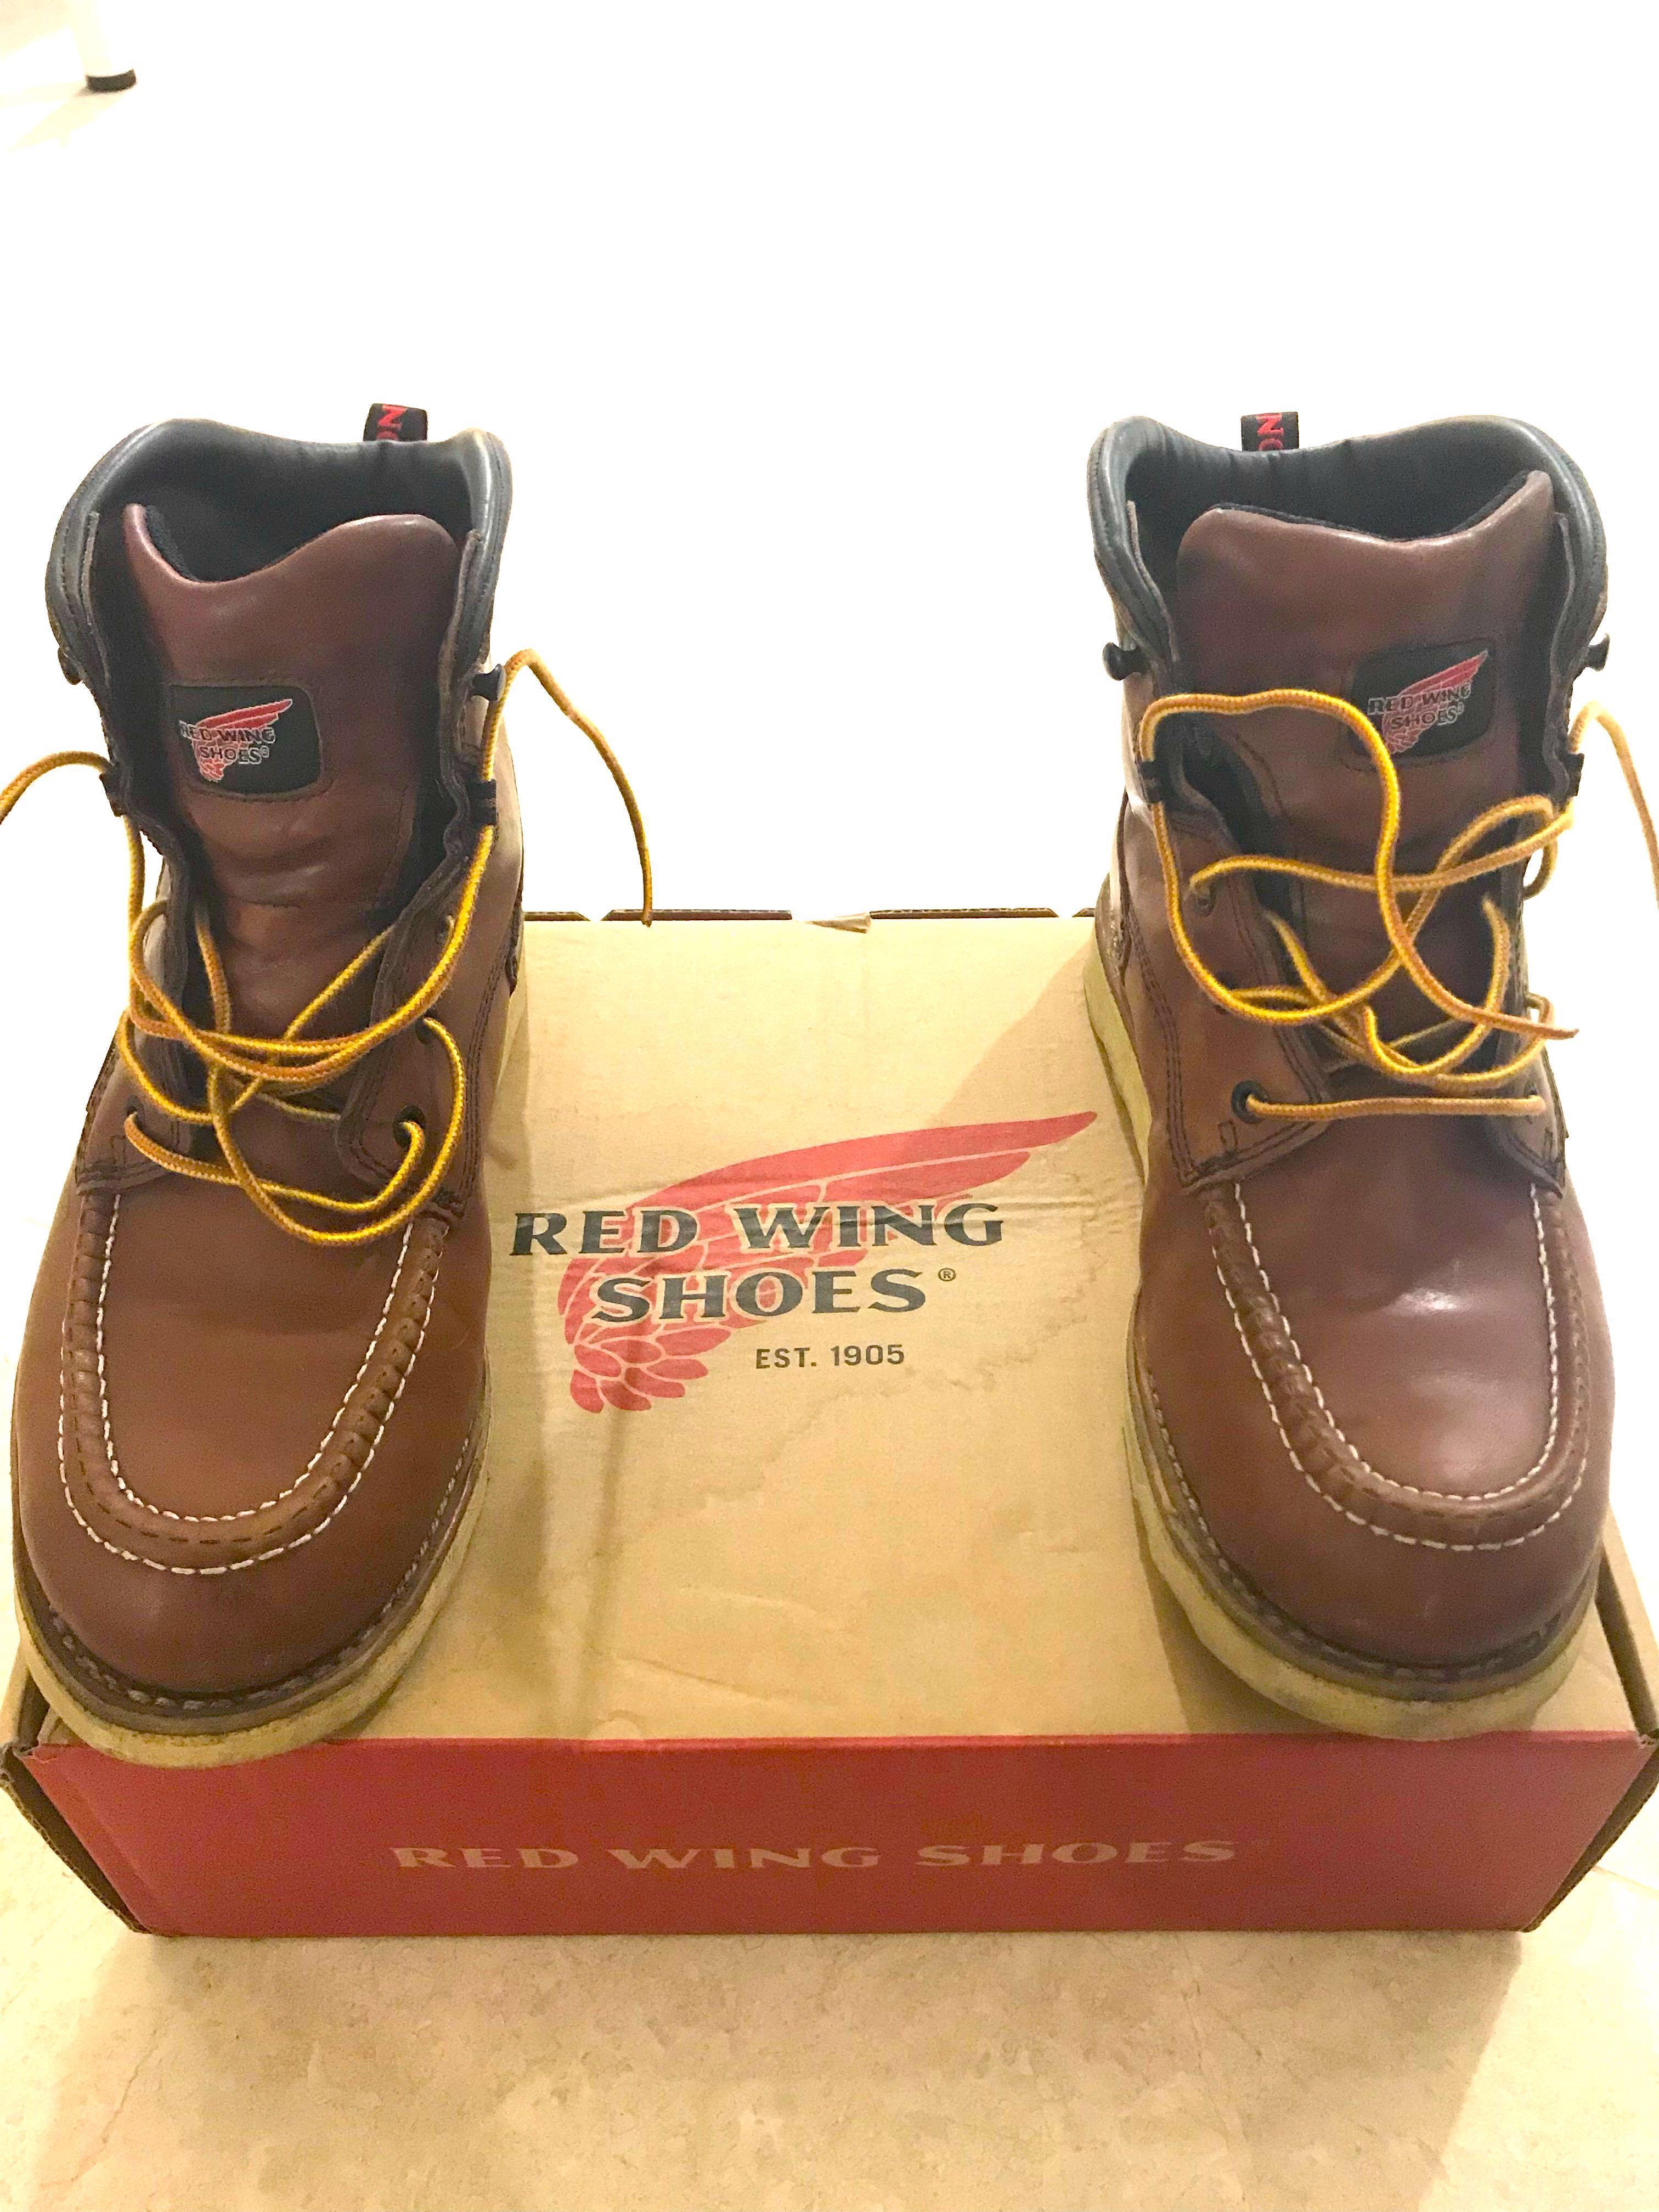 red wing wellington boots